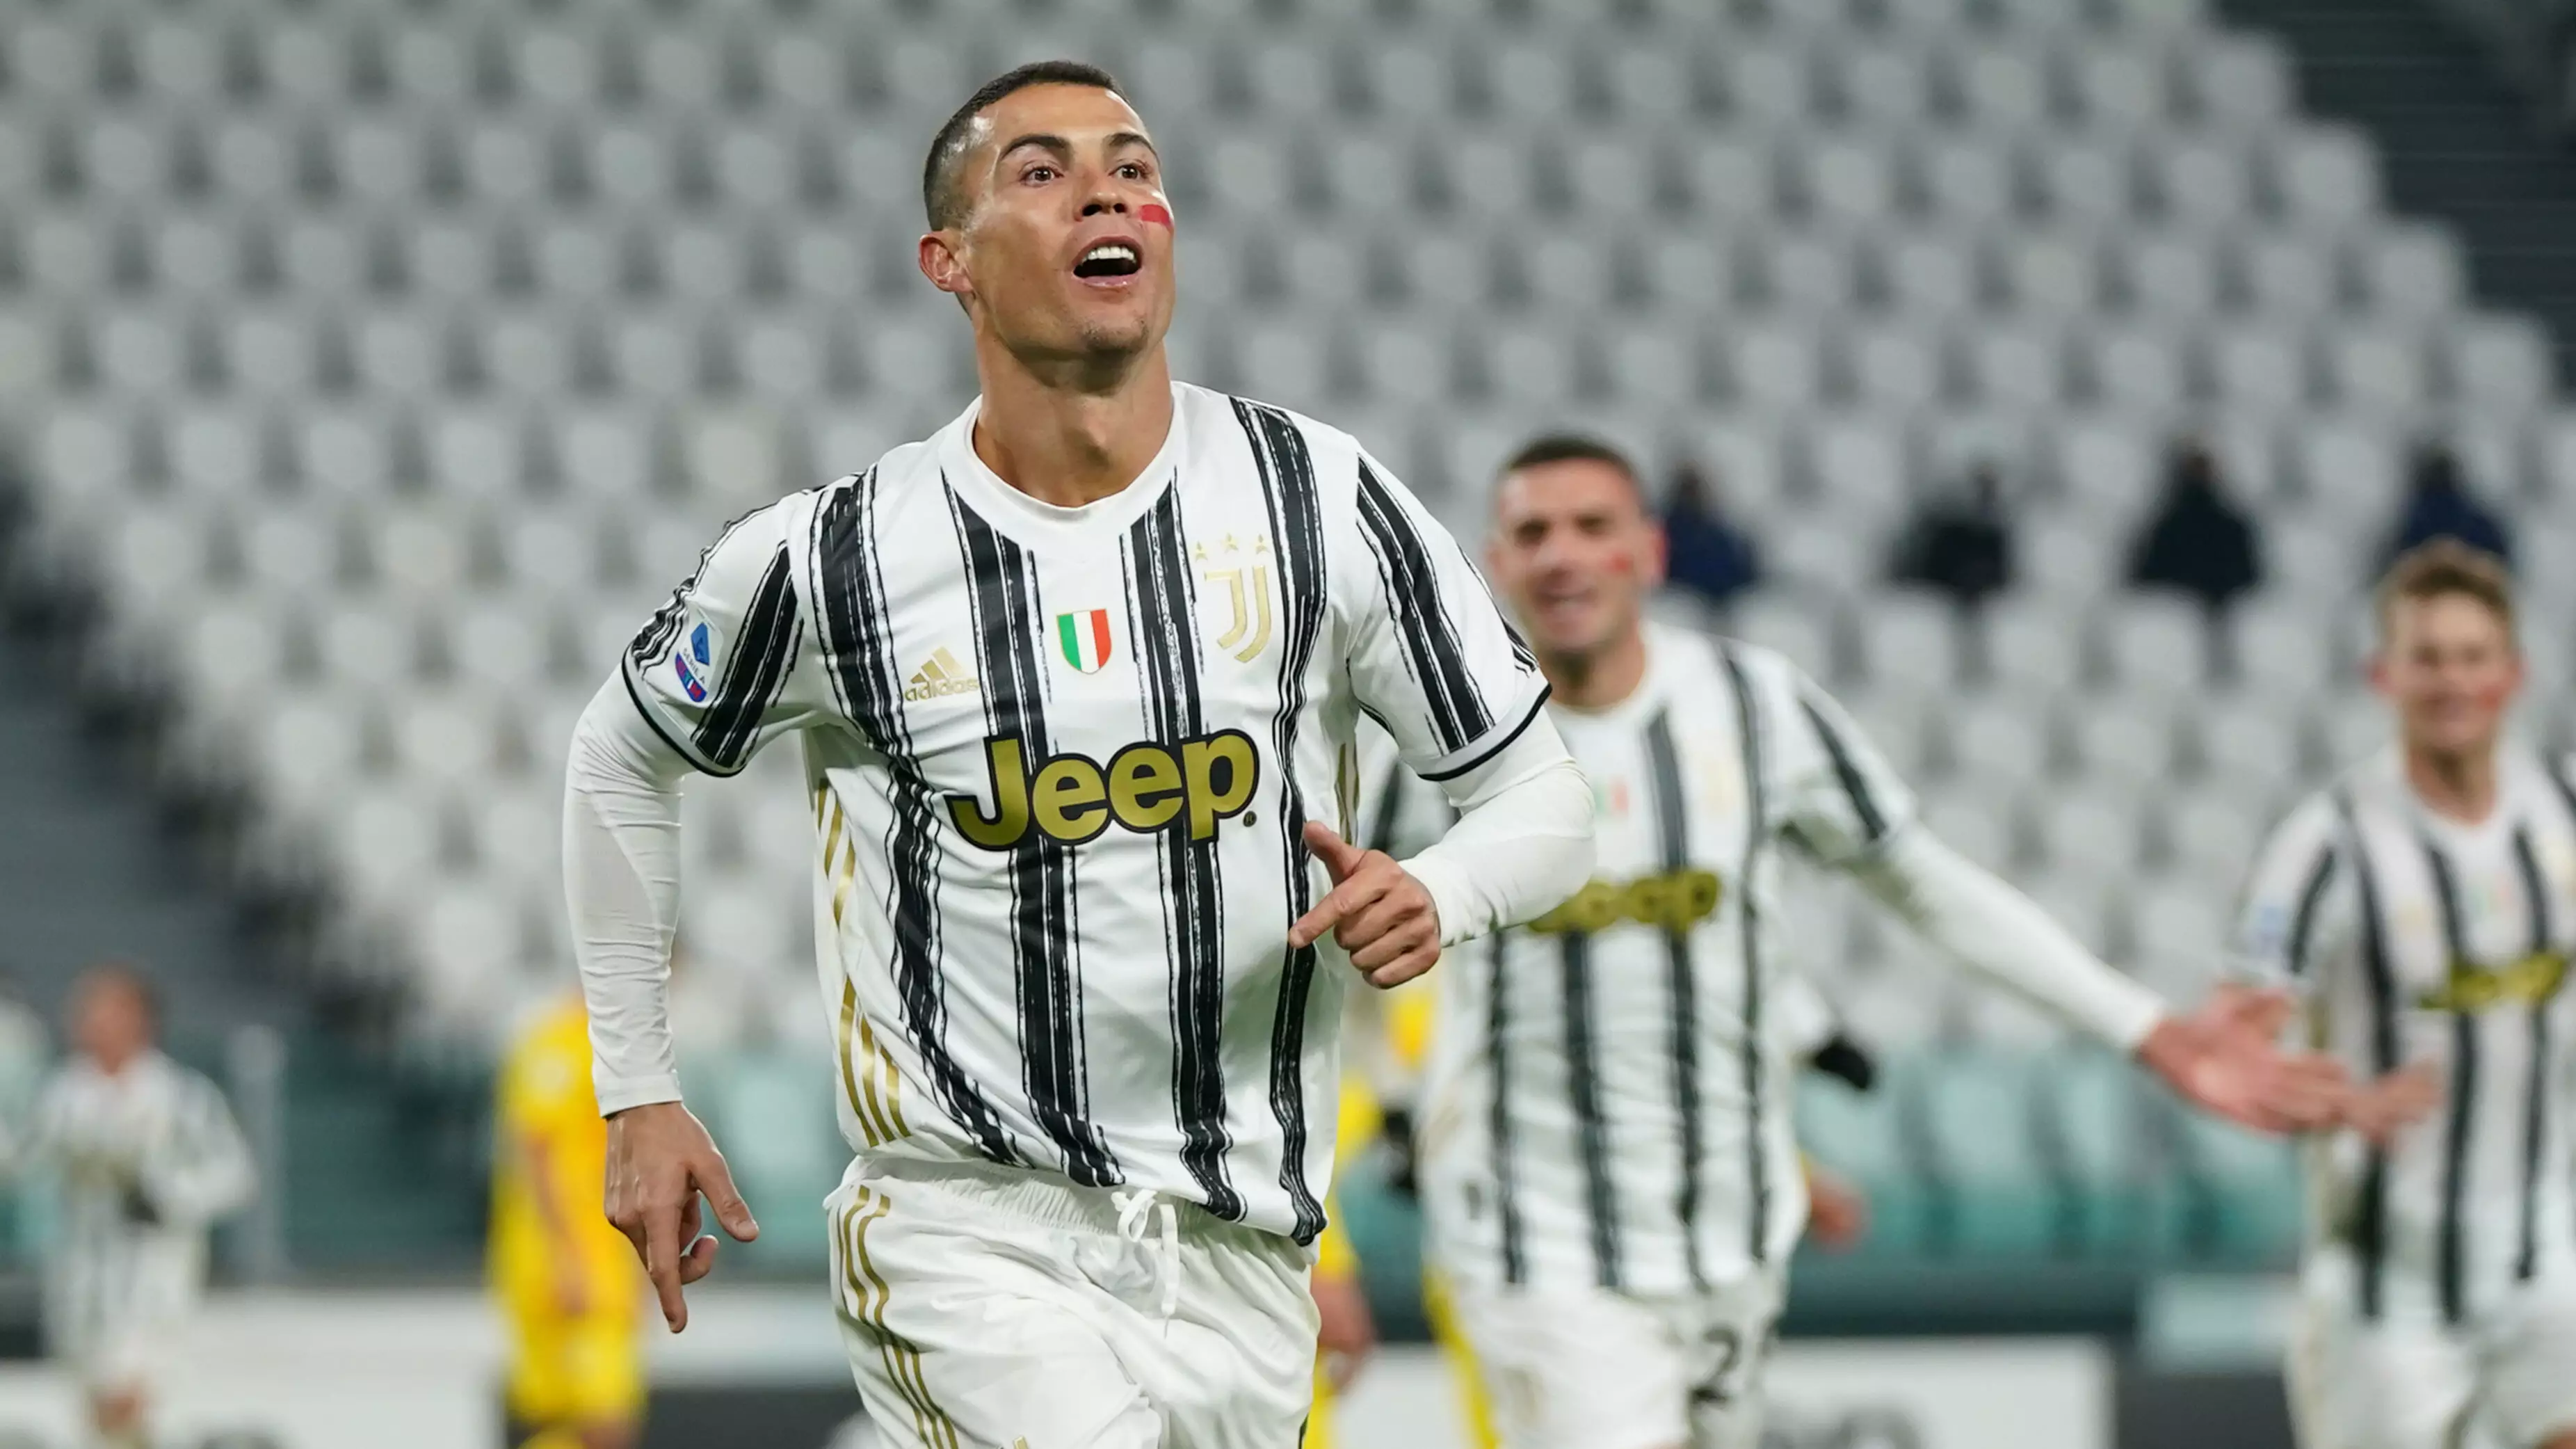 Portuguese Superstar Cristiano Ronaldo Wins Race To Hit 100 Club Goals In 21st Century